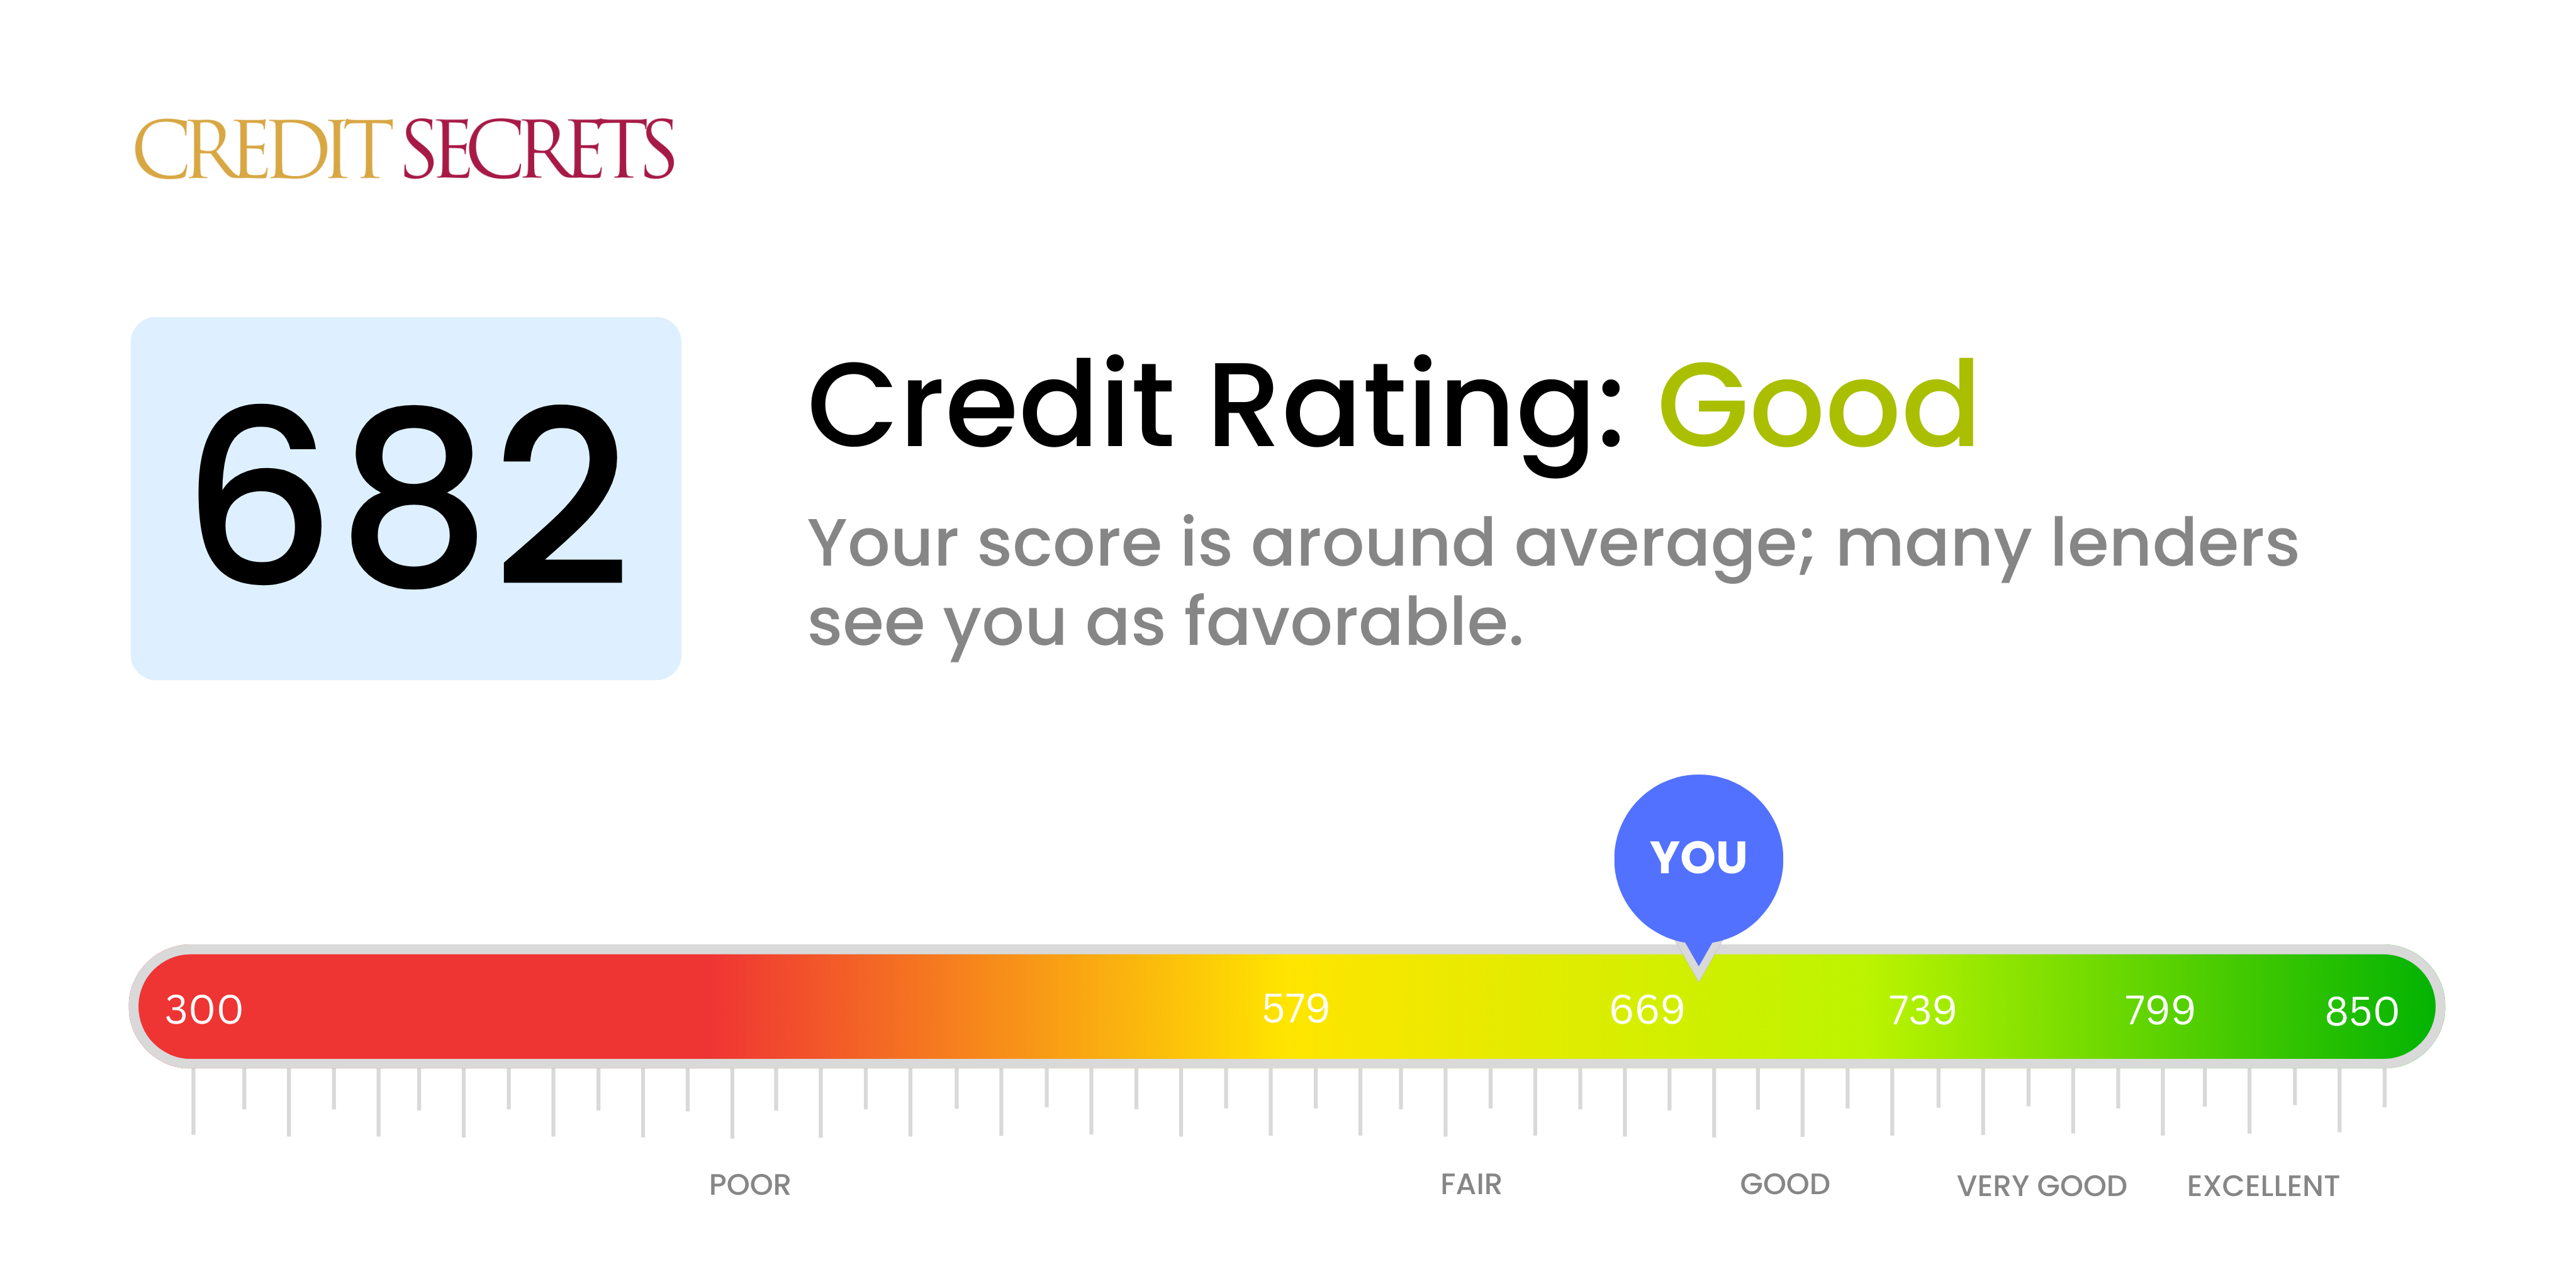 Is 682 a good credit score?